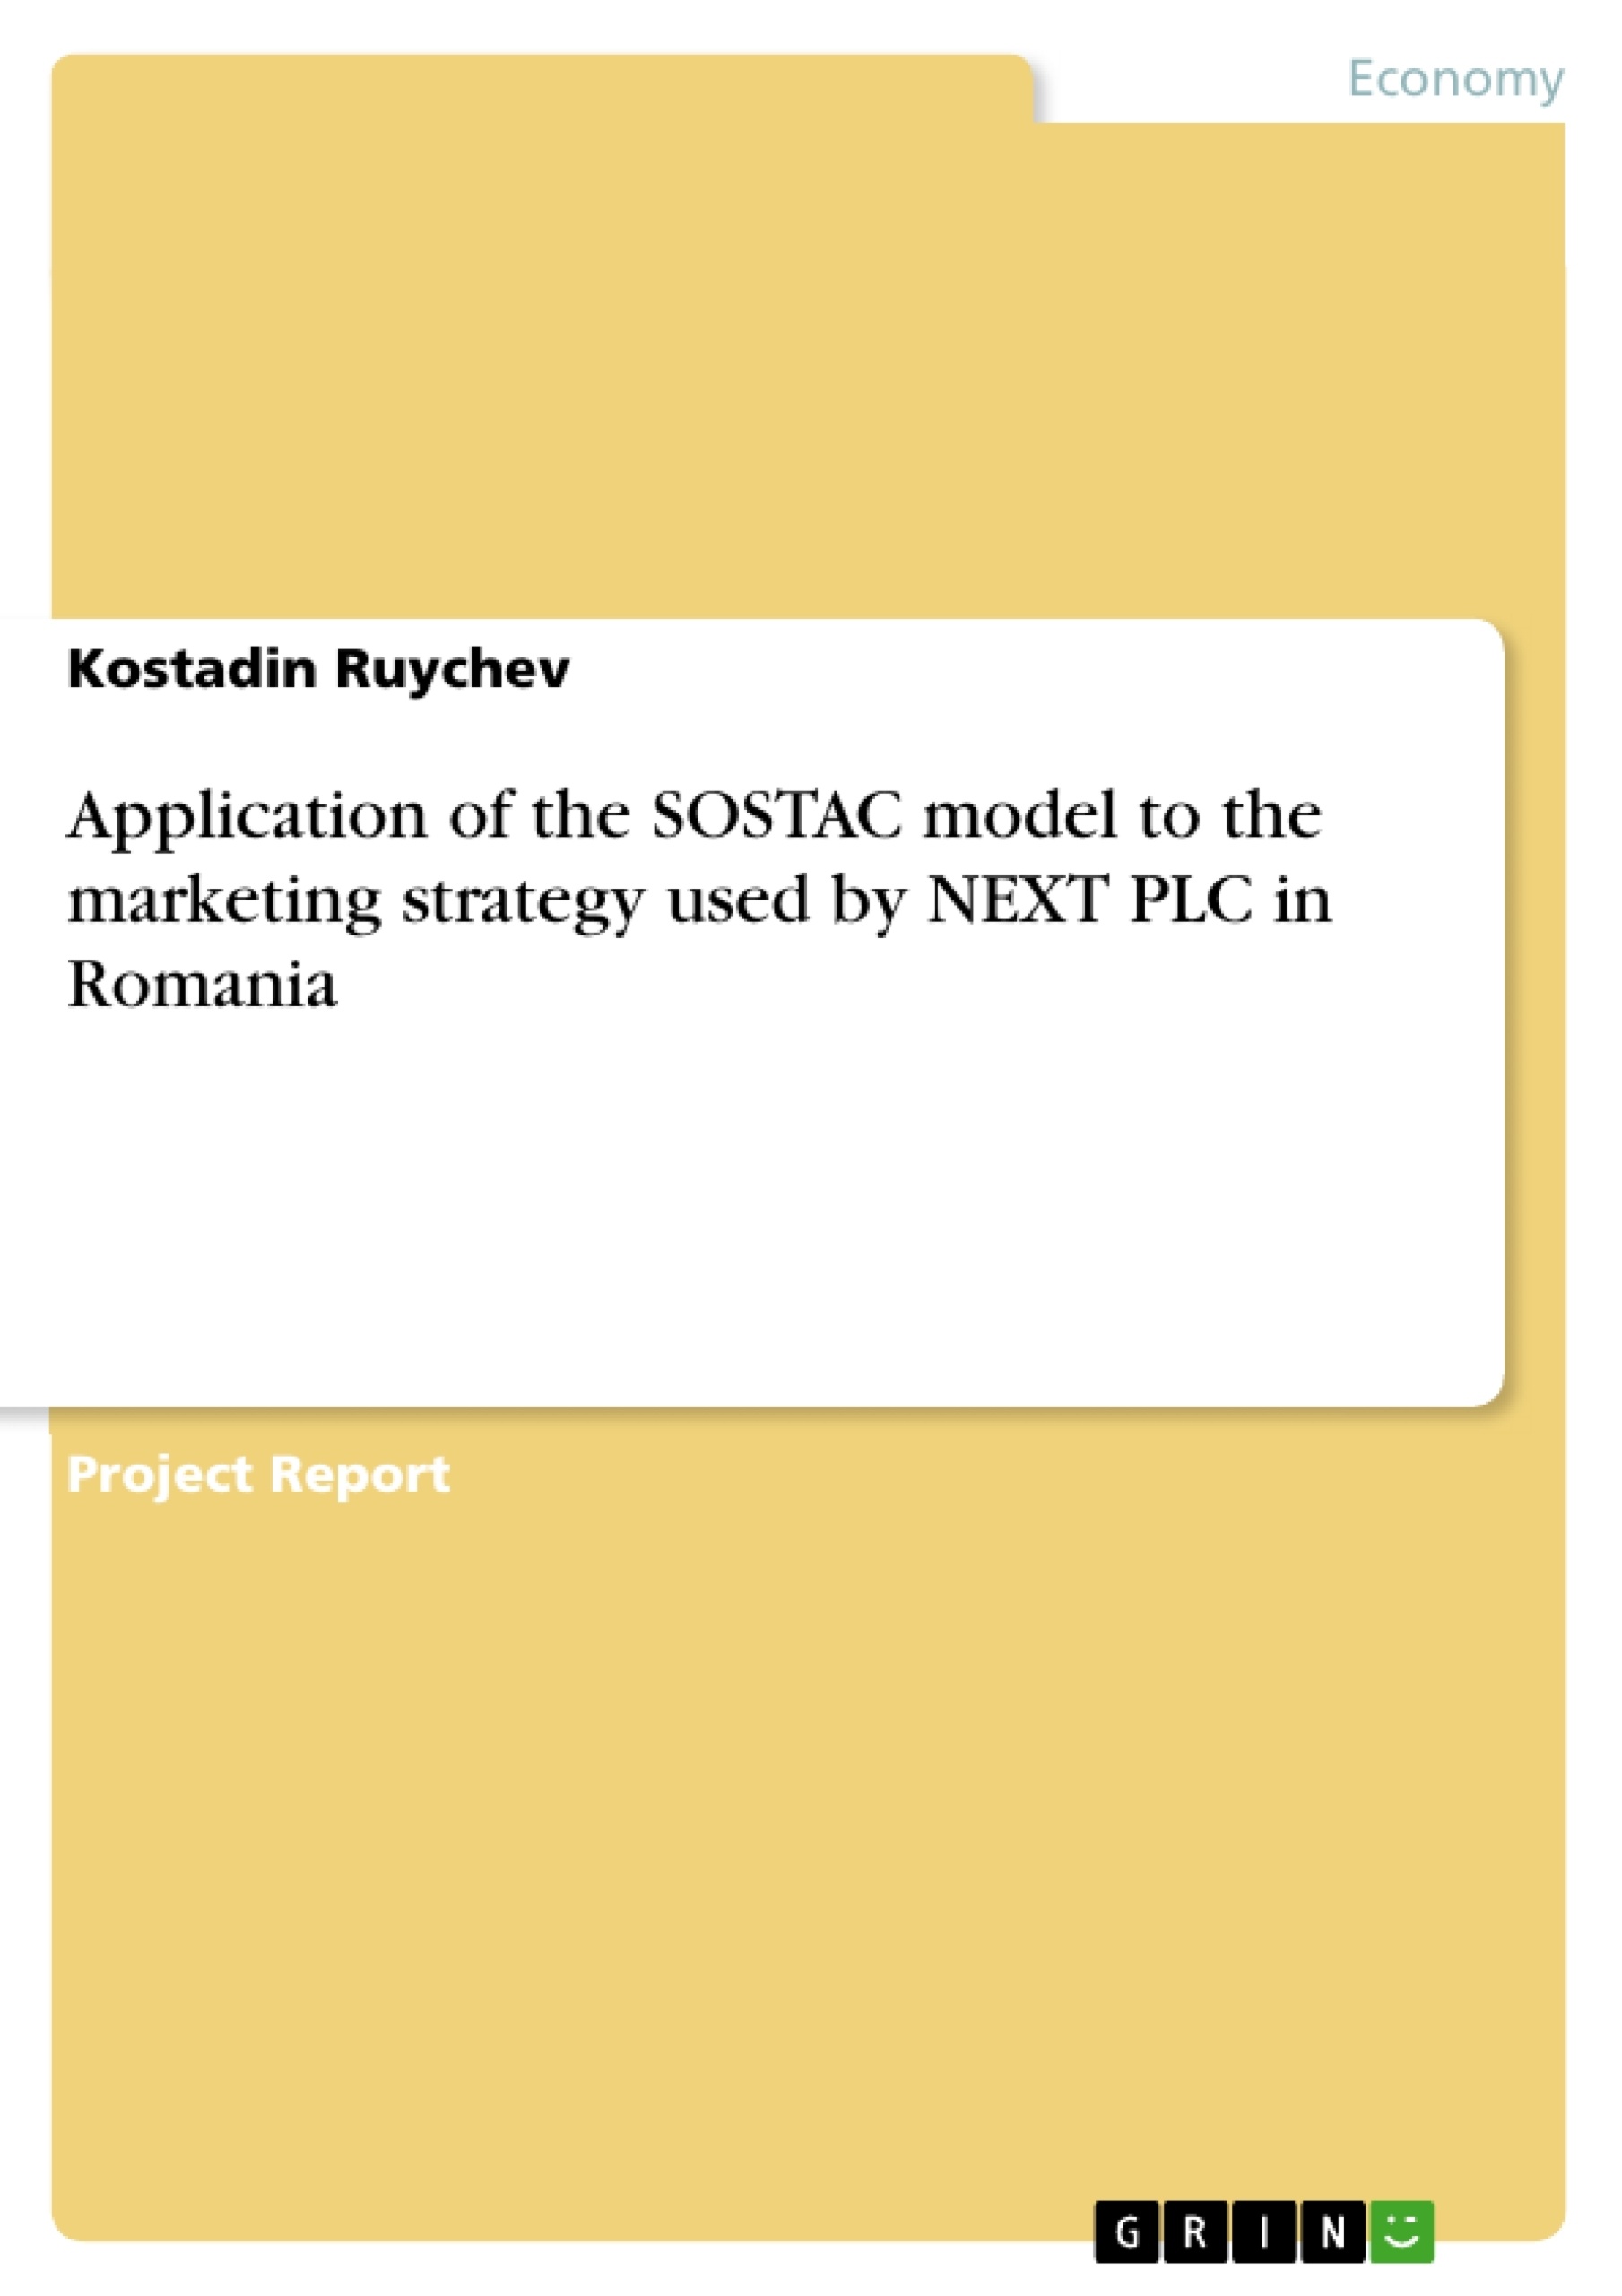 Titre: Application of the SOSTAC model to the marketing strategy used by NEXT PLC in Romania